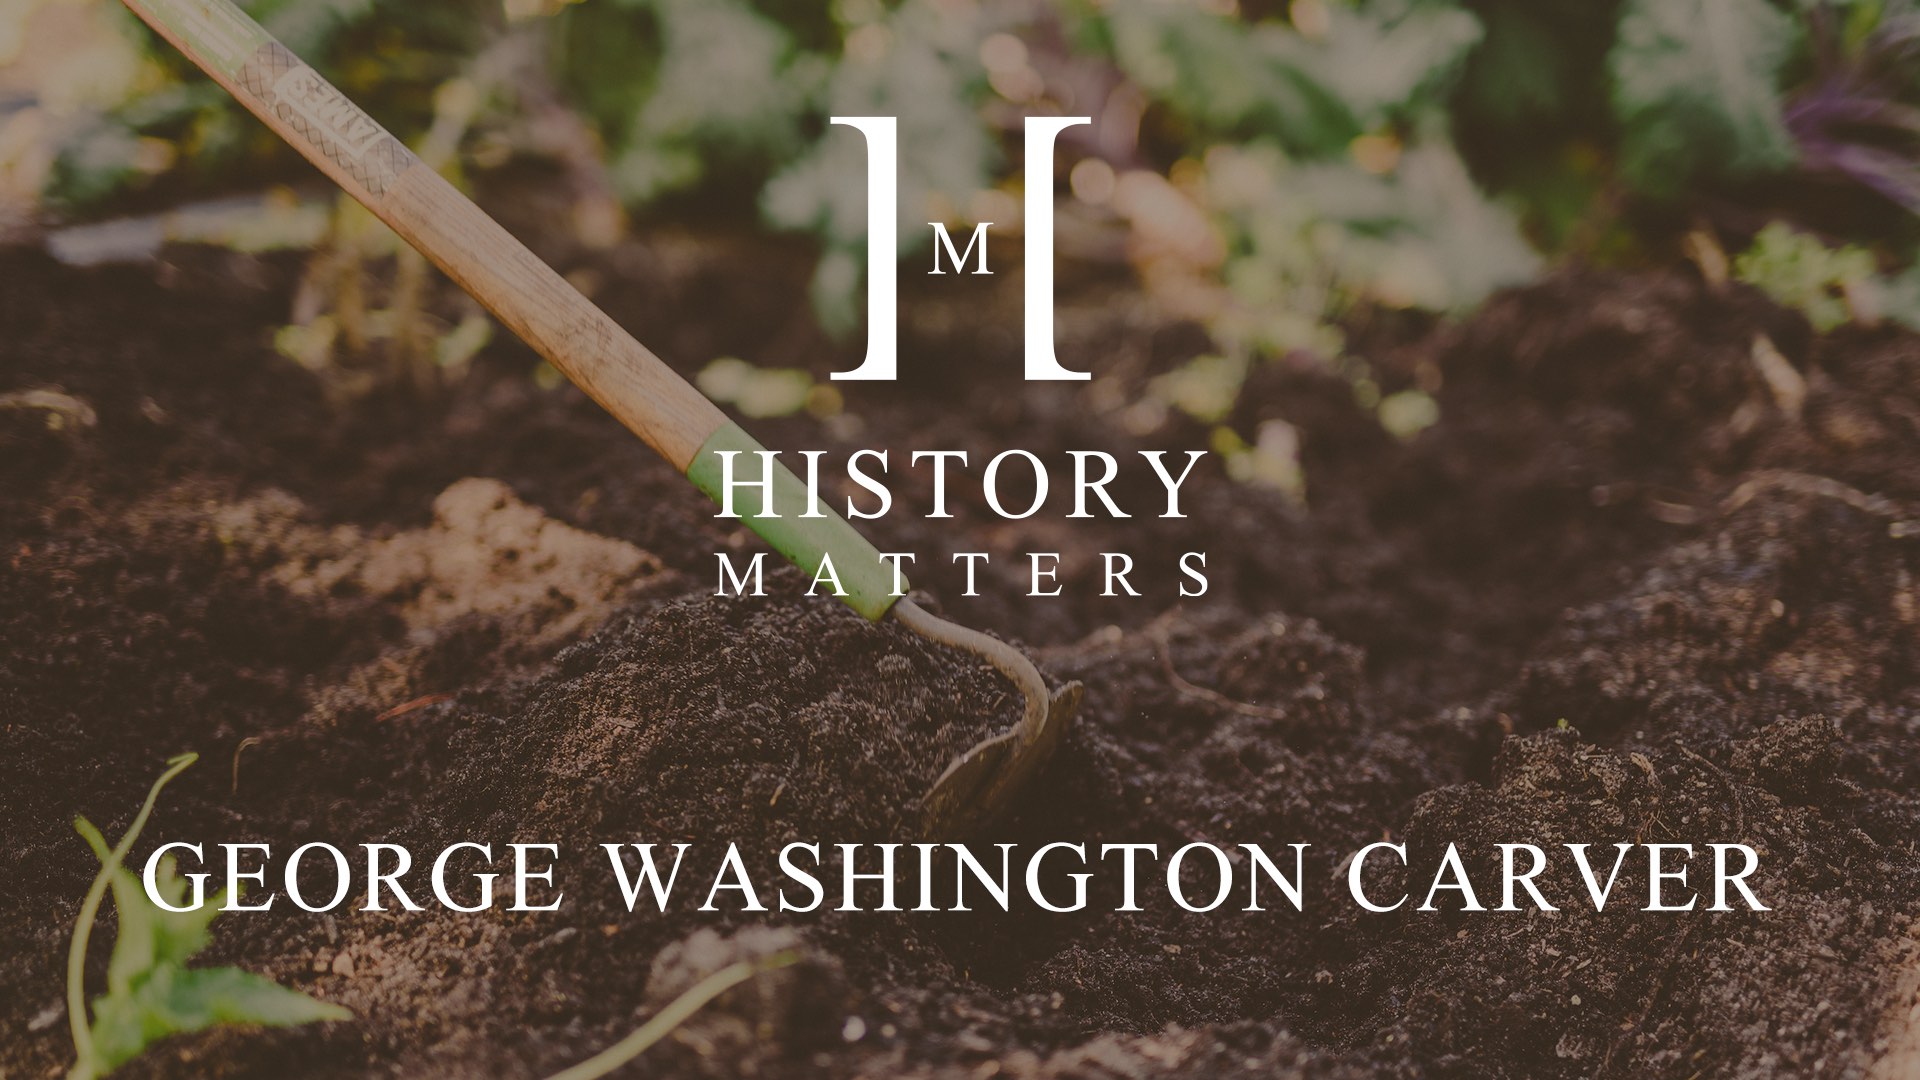 White HM George Washington Carver logo with background showing a hoe being used in dirt in a garden